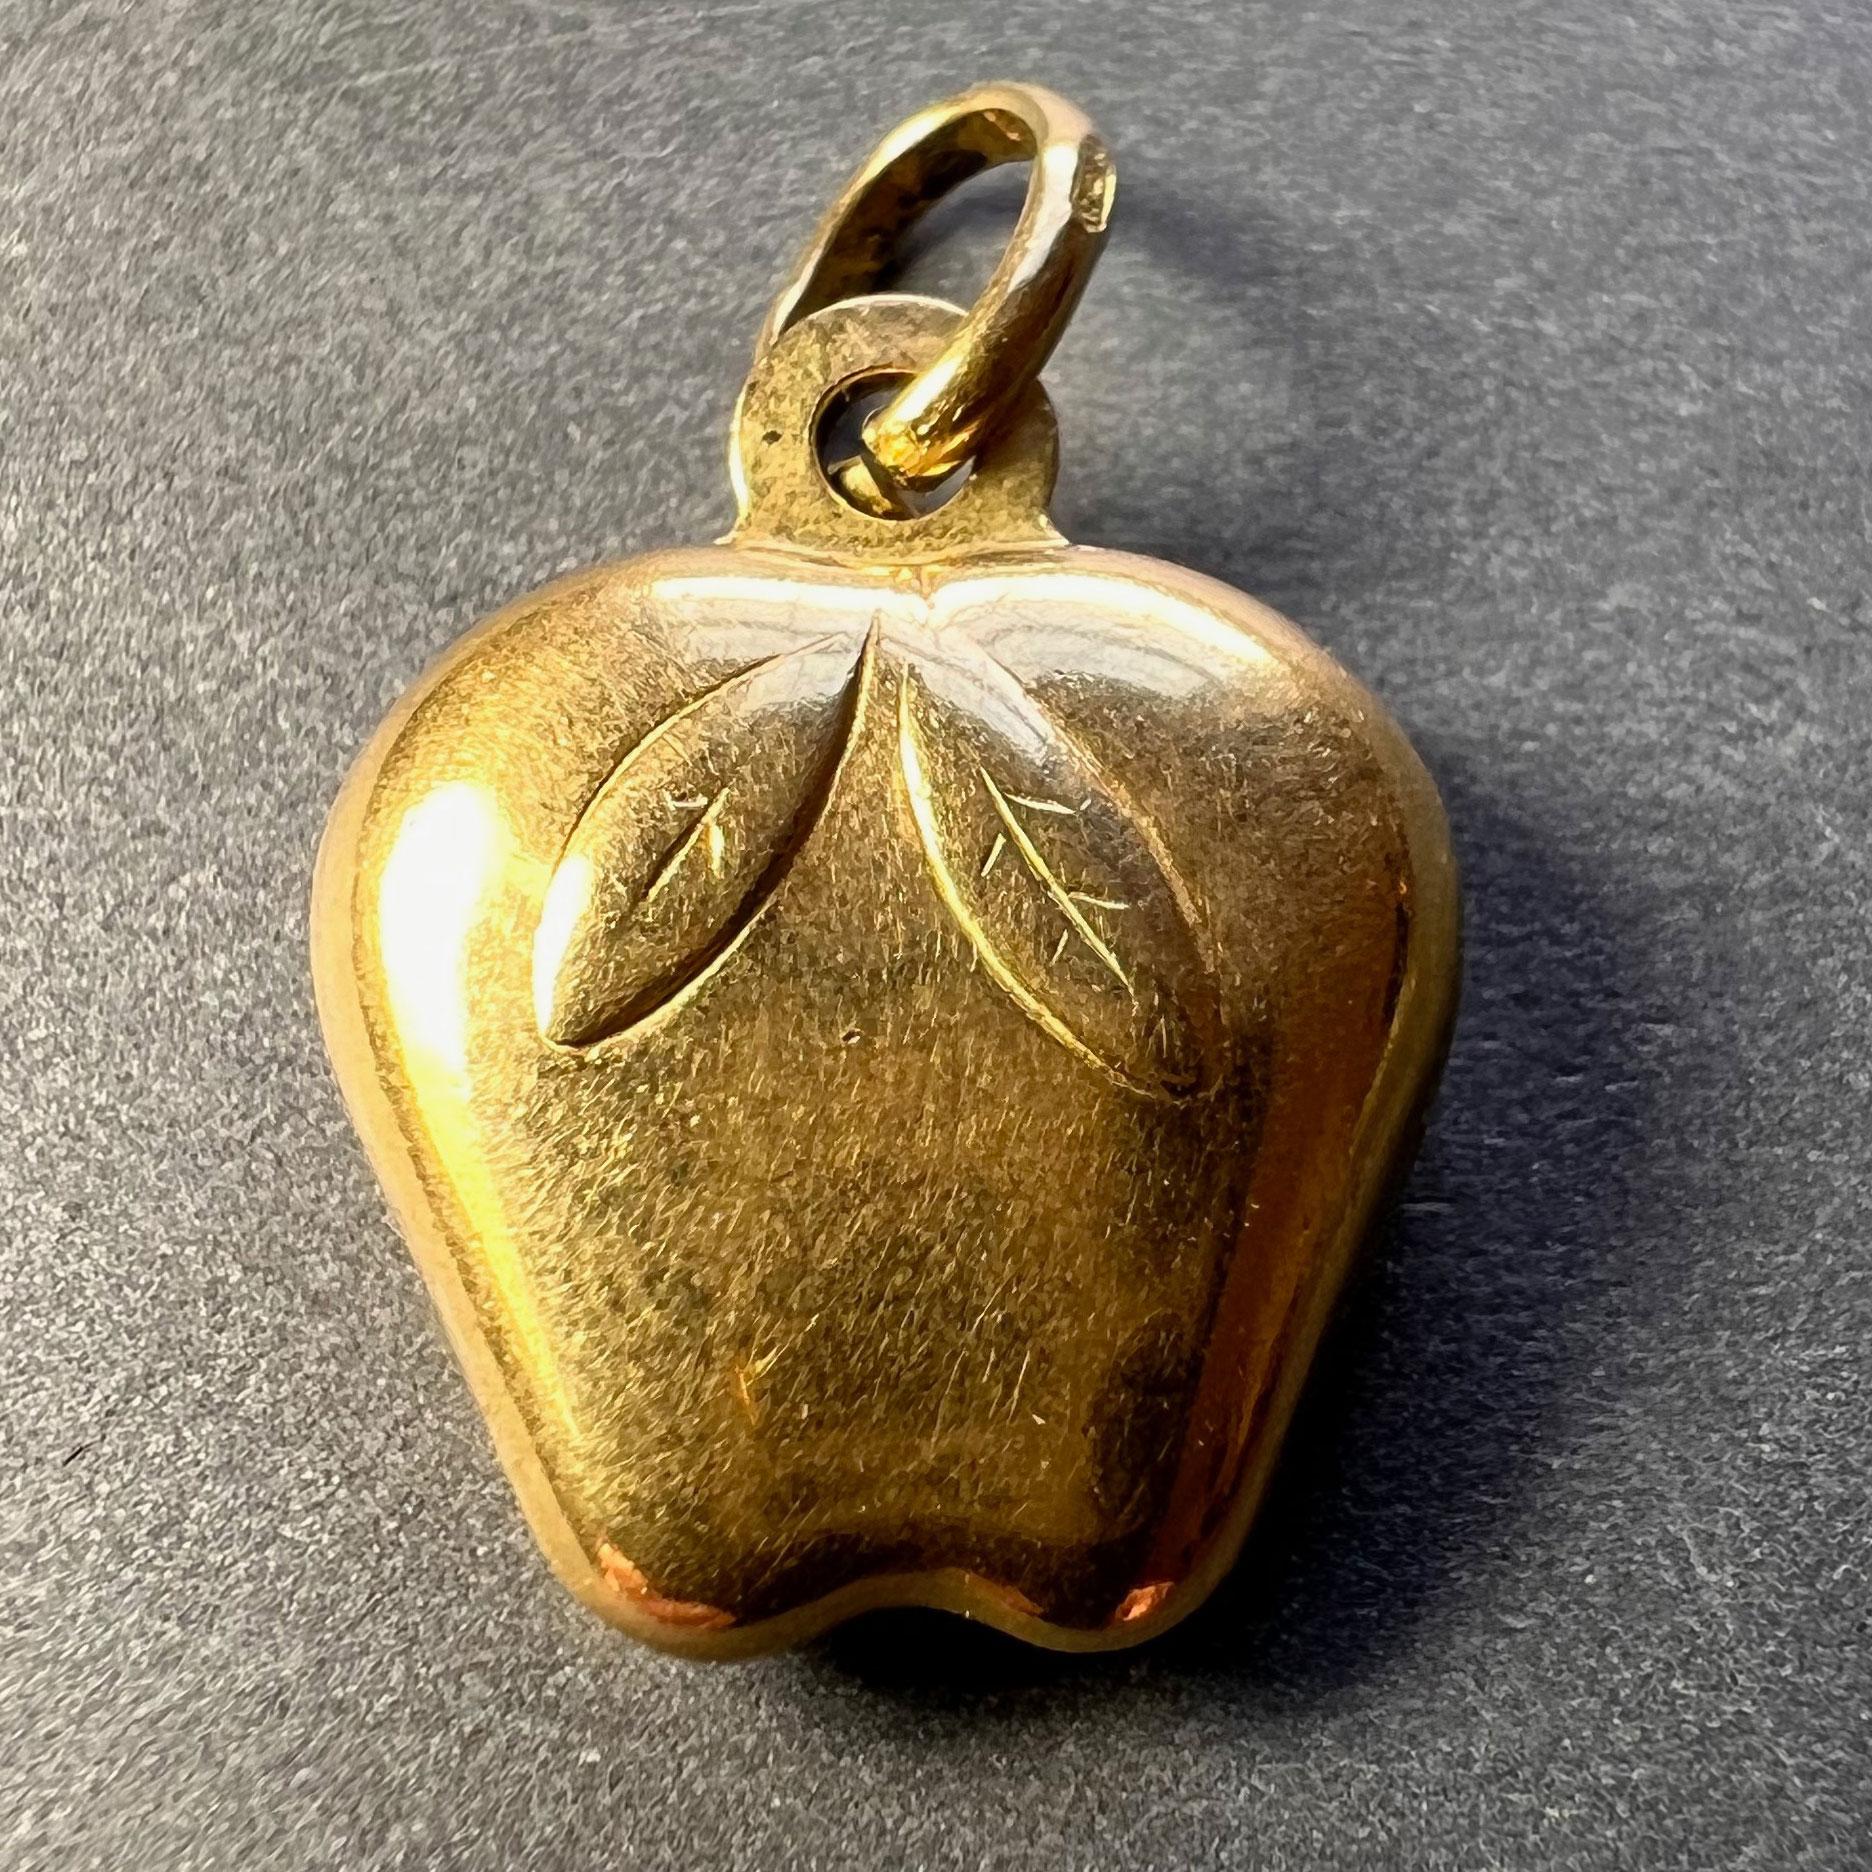 An 18 karat (18K) yellow gold fruit charm pendant designed as an apple. Stamped 750 for 18 karat gold and 027AR for Italian manufacture to the bail.
 
Dimensions: 1.7 x 1.4 x 0.55 cm (not including jump ring)
Weight: 1.97 grams
